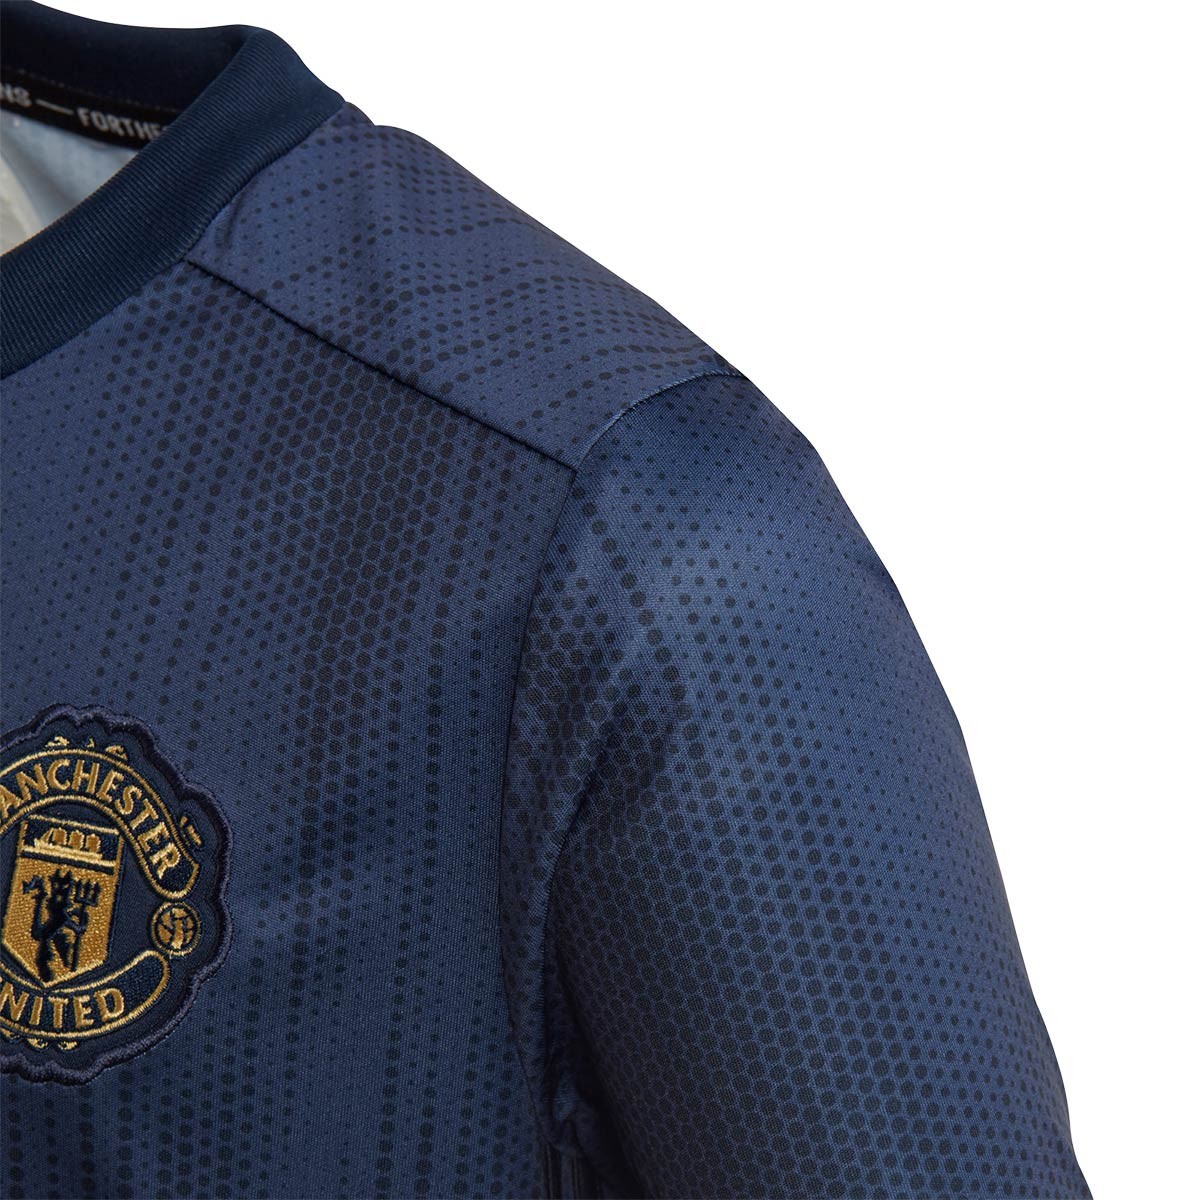 manchester united navy jersey